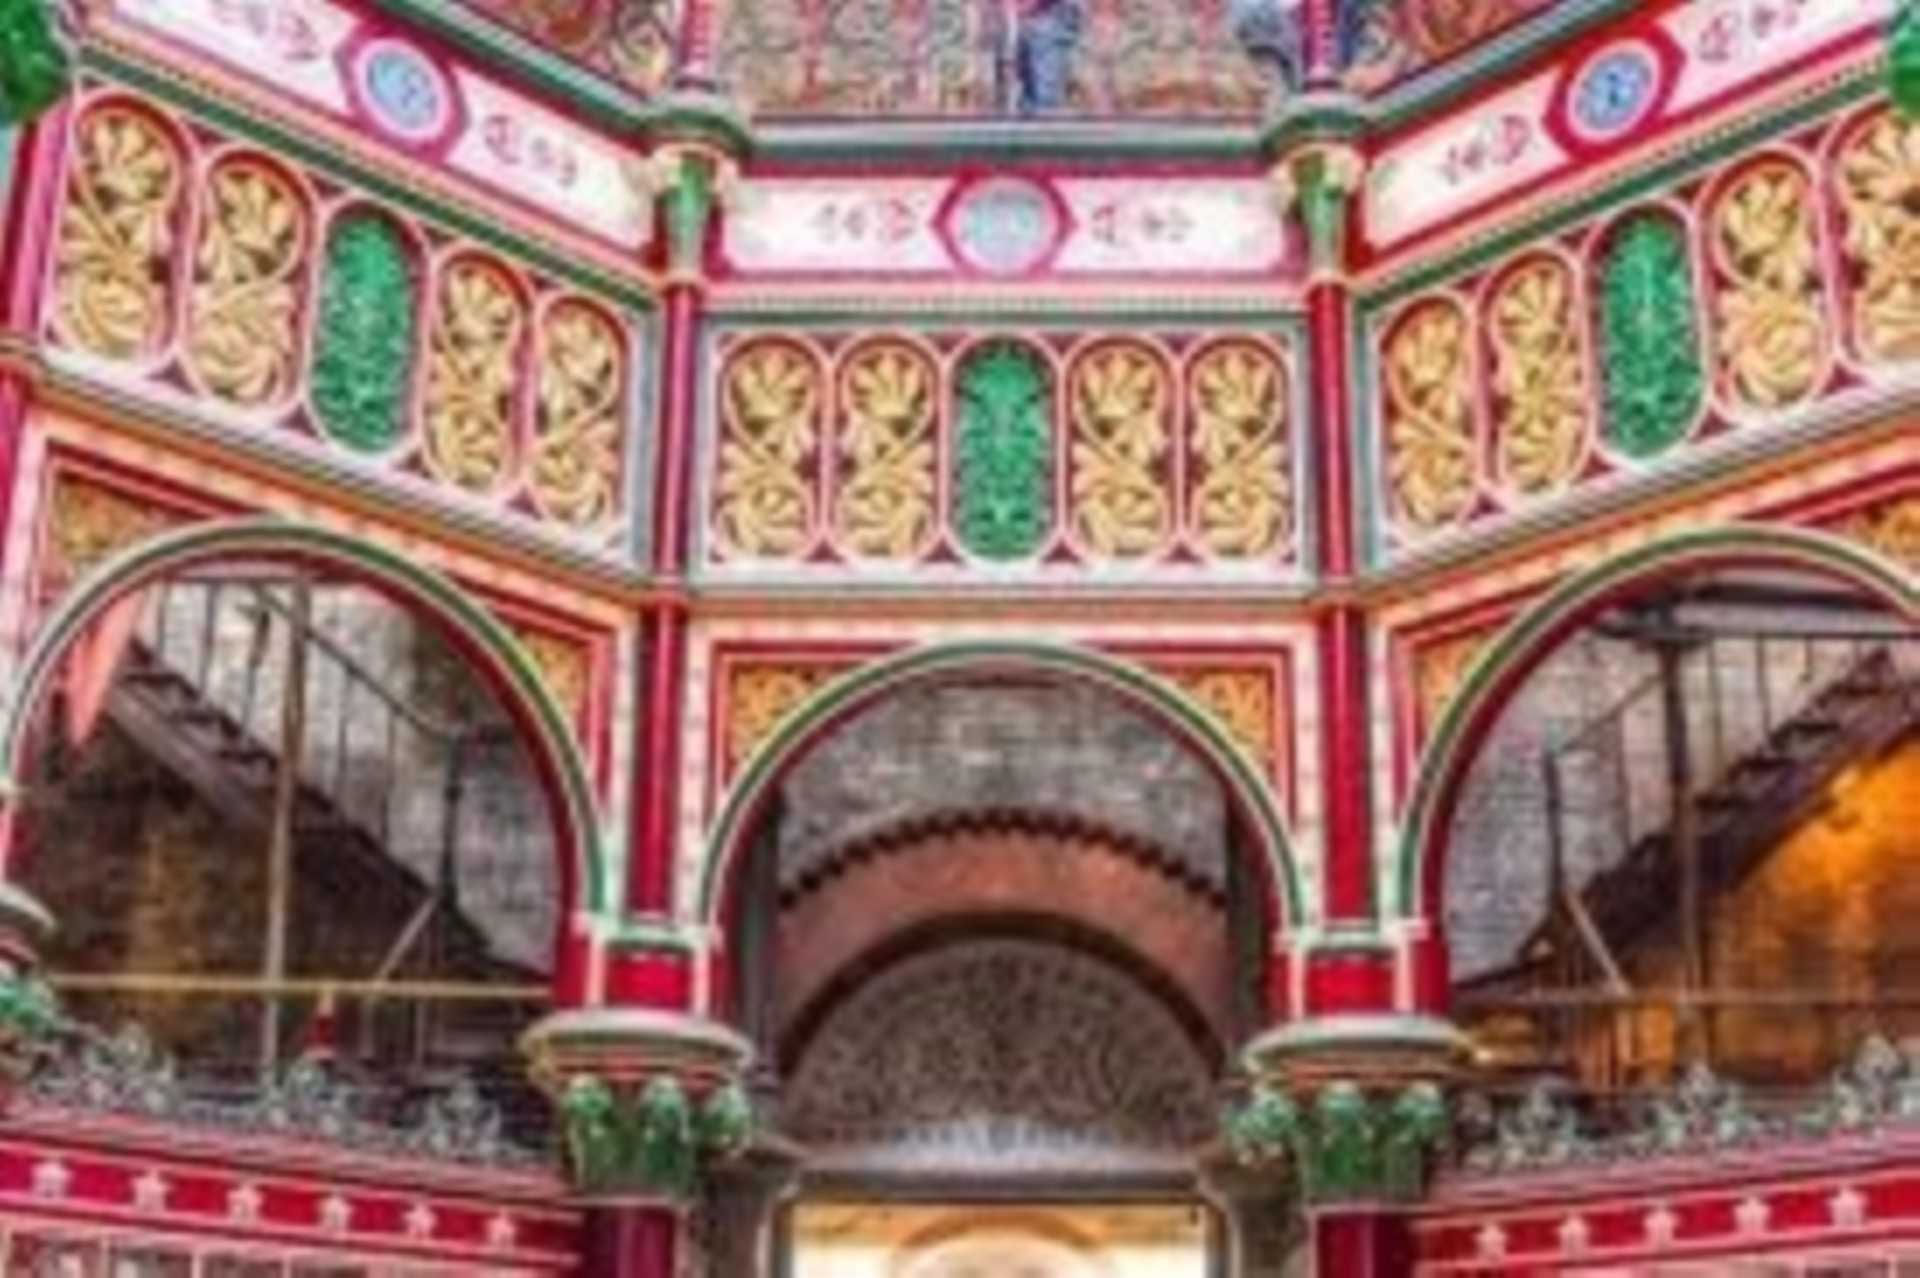 CROSSNESS OPEN DAY - SUNDAY 16TH OCTOBER